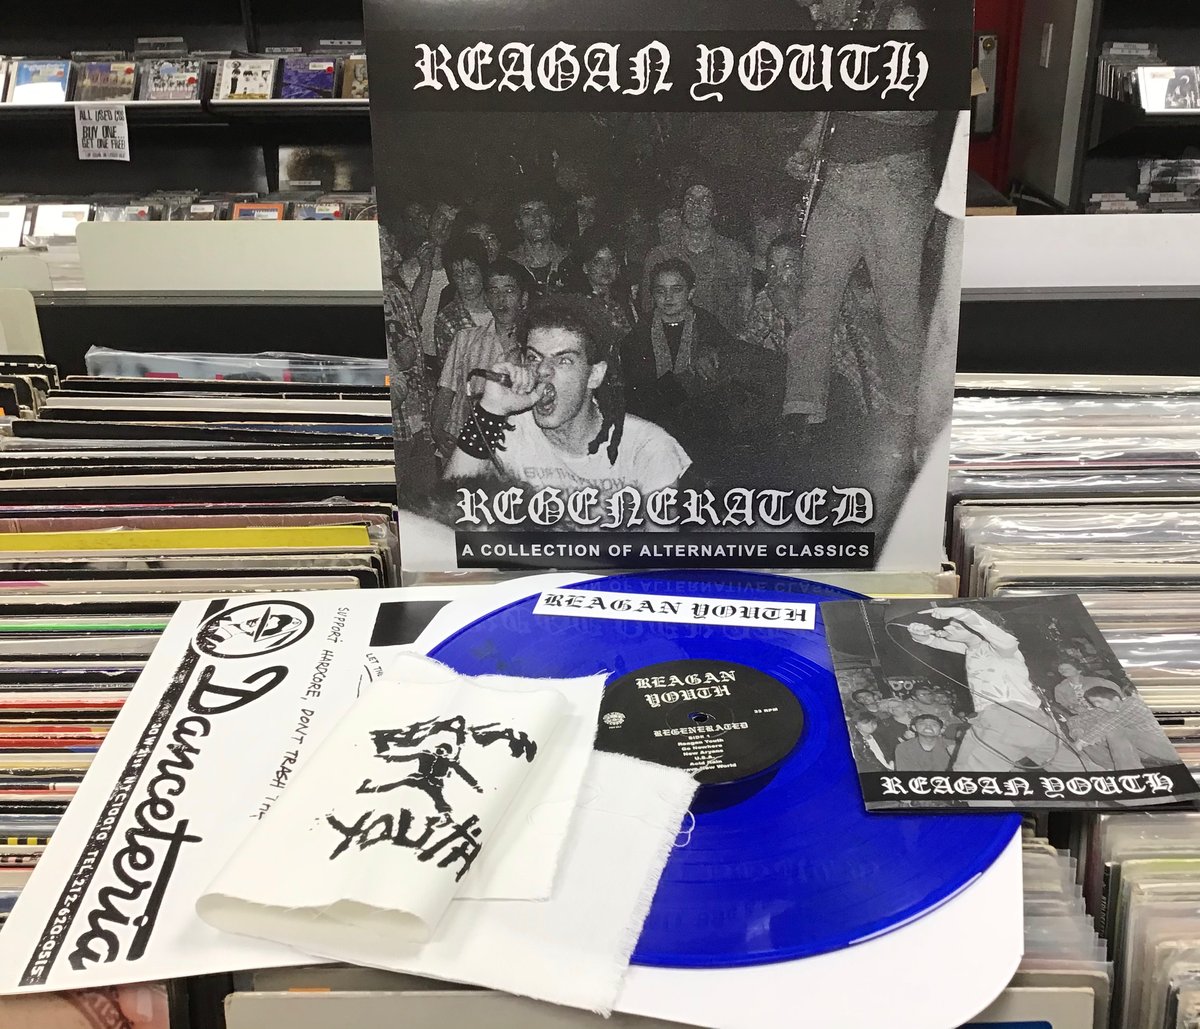 Reagan Youth “Regenerated - A Collection of Alternative Classics” LP ...